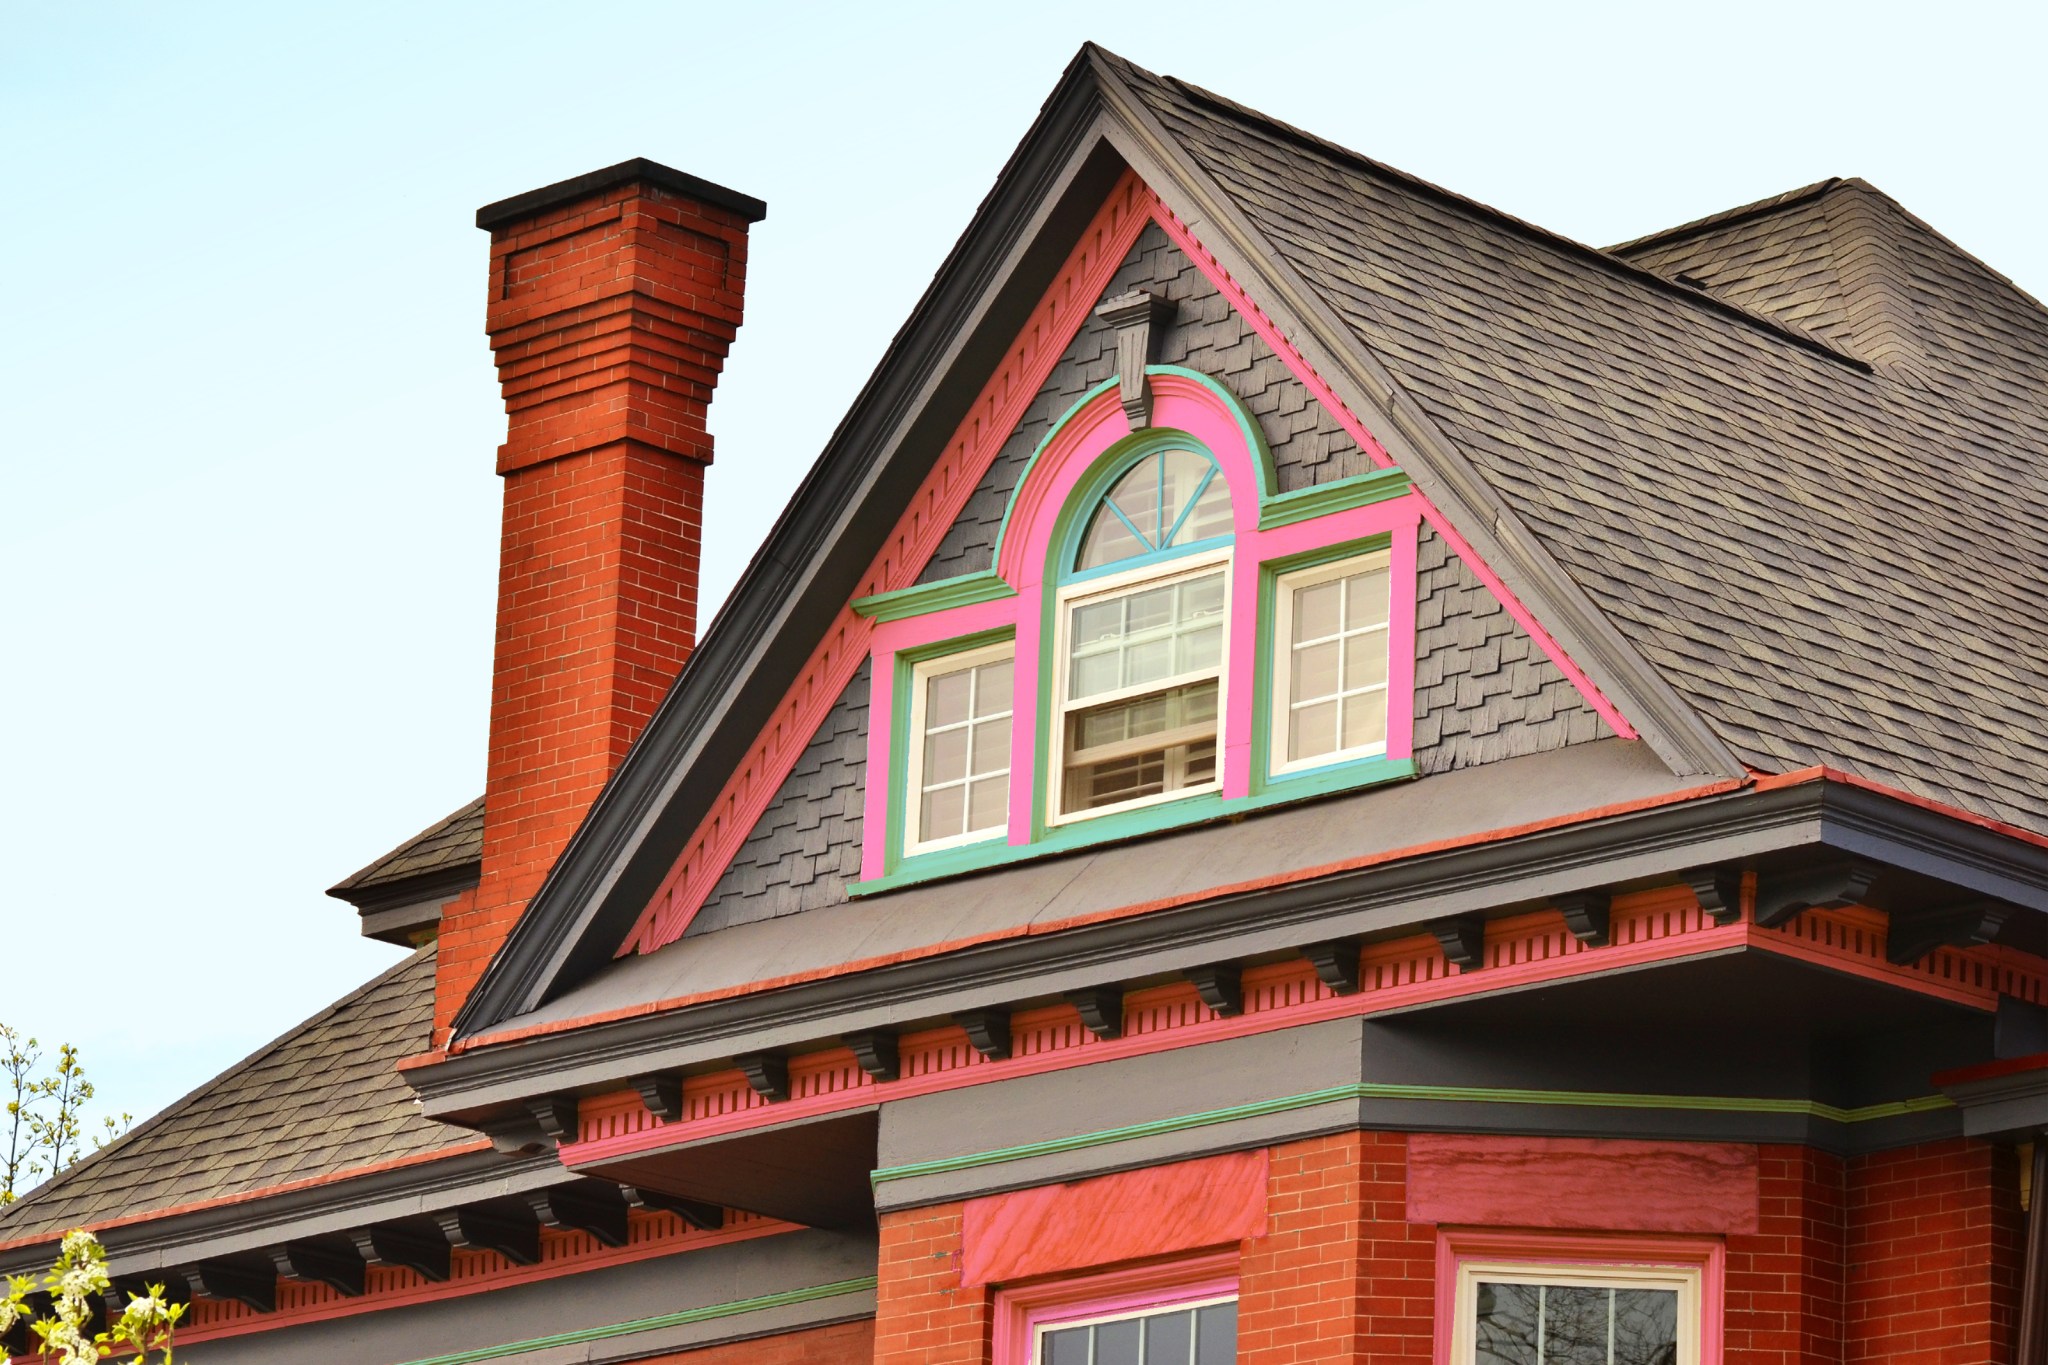 Brand new roof on house with pink and green detailing